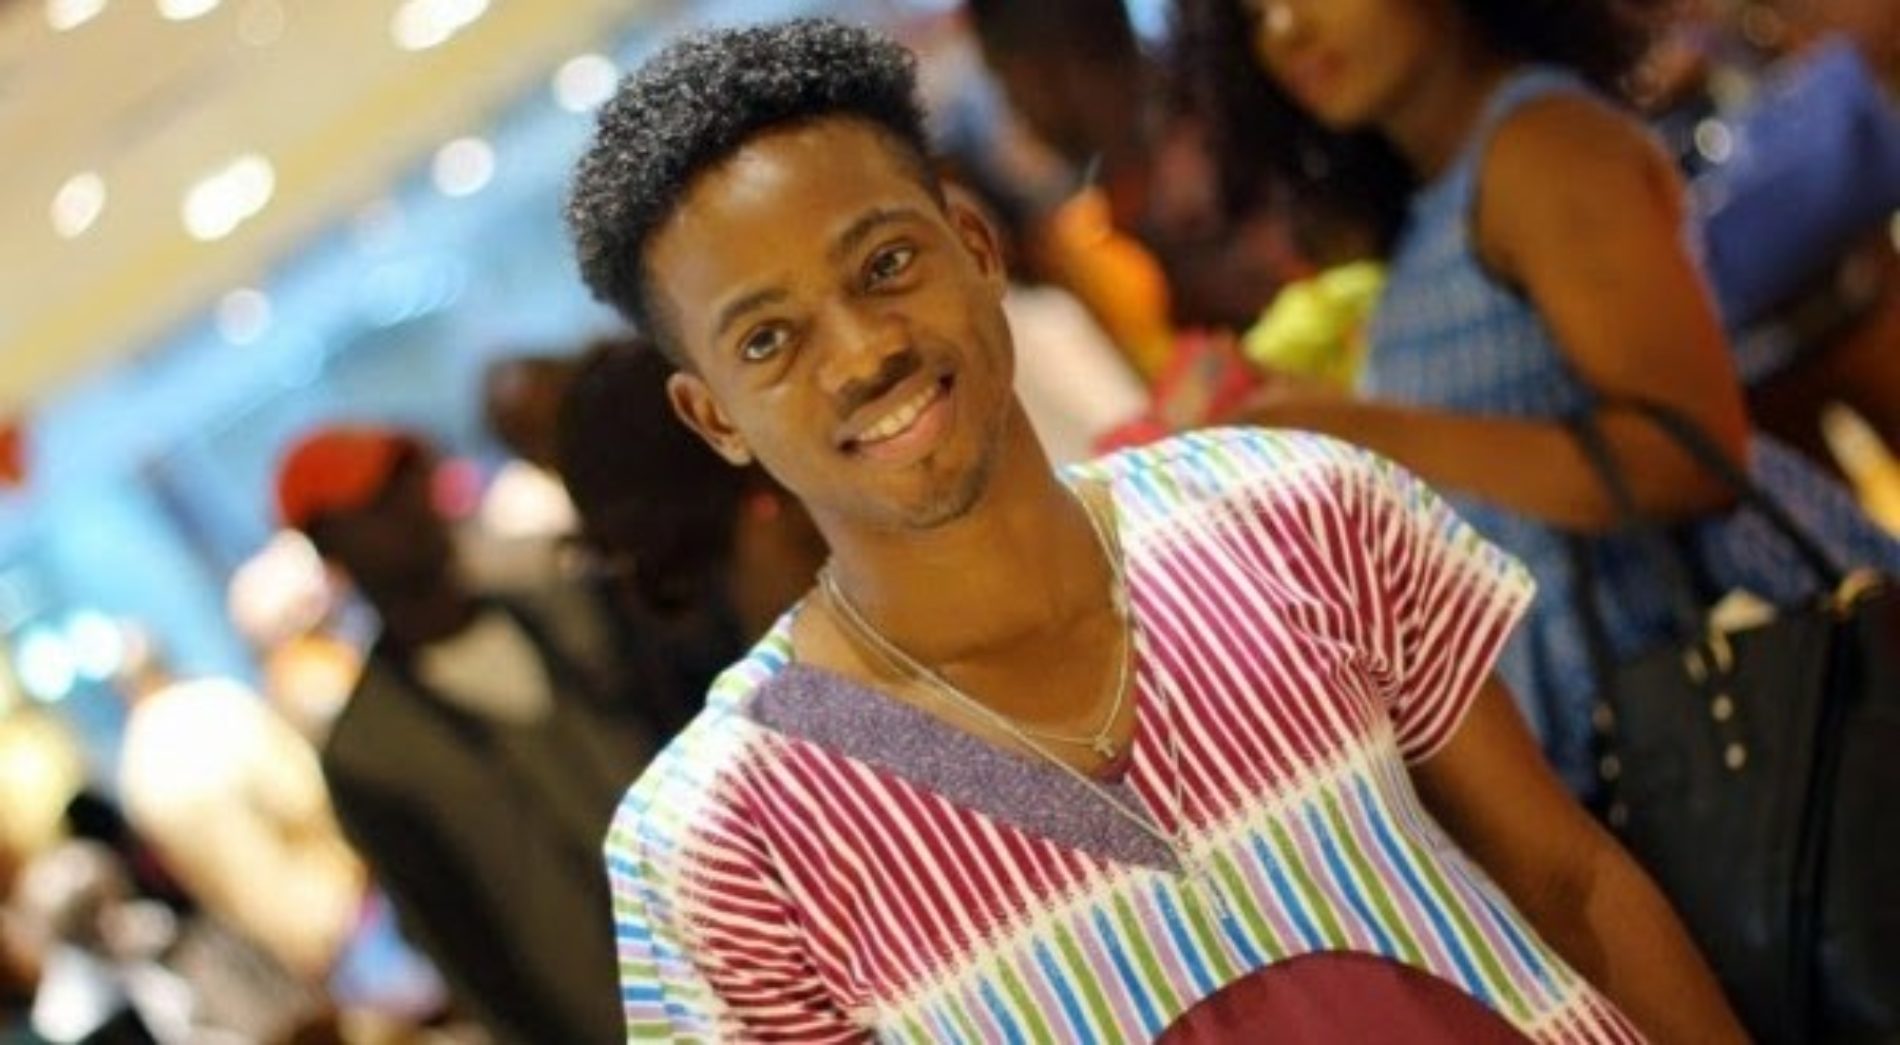 Korede Bello has apparently become the Nigerian Justin Bieber